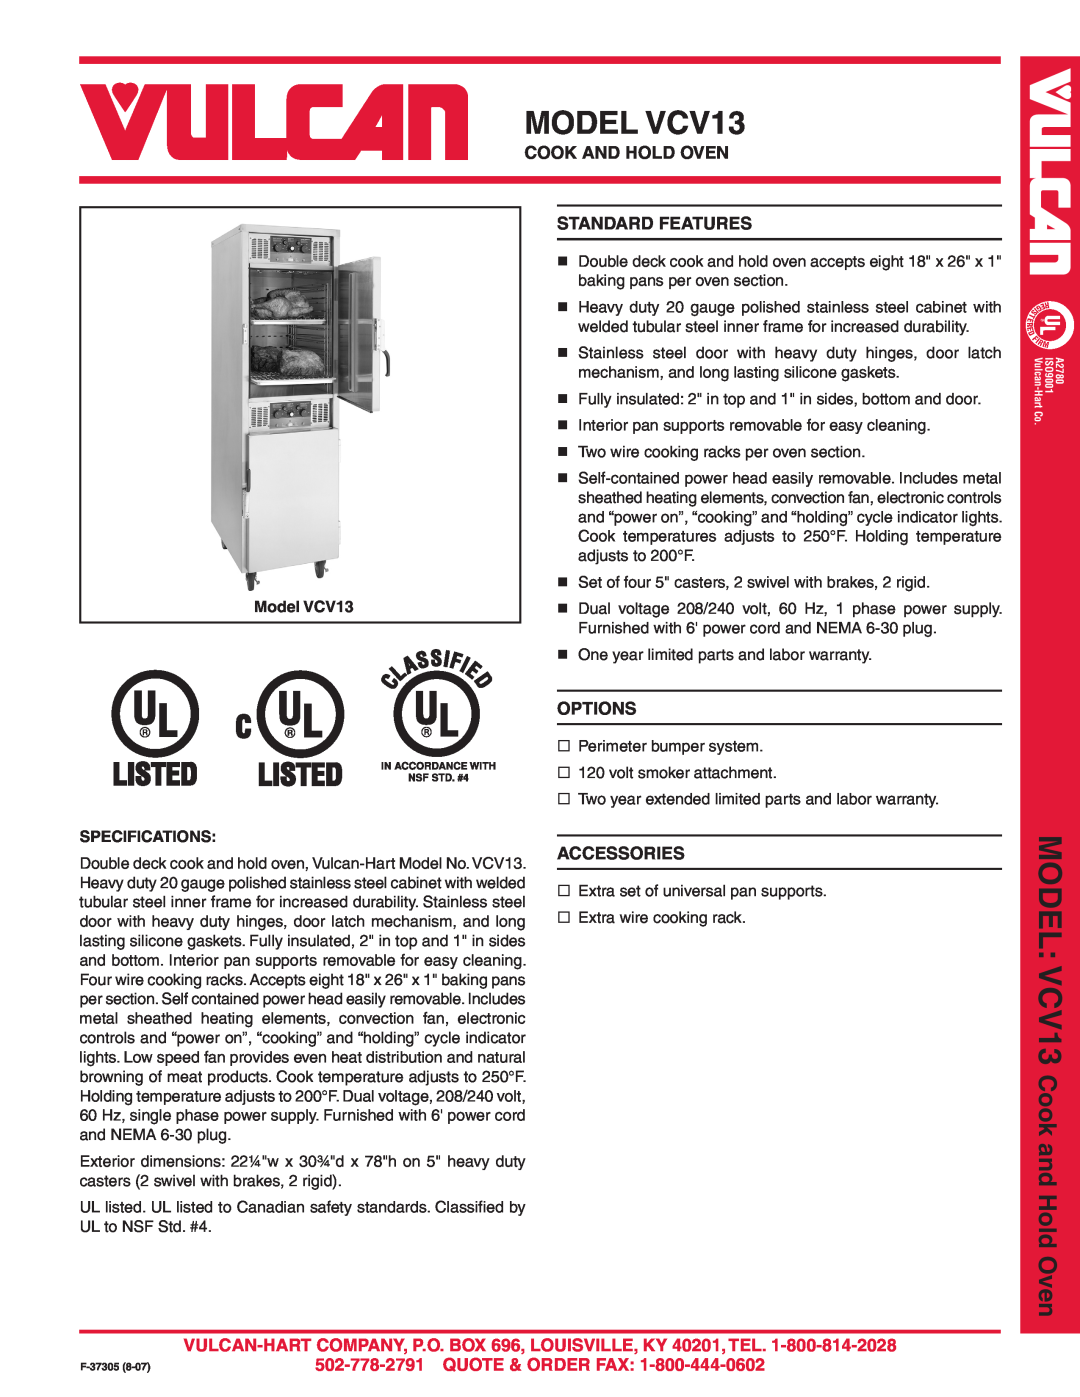 Vulcan-Hart warranty MODEL VCV13, Cook And Hold Oven, Standard Features, Options, Accessories, Model VCV13 